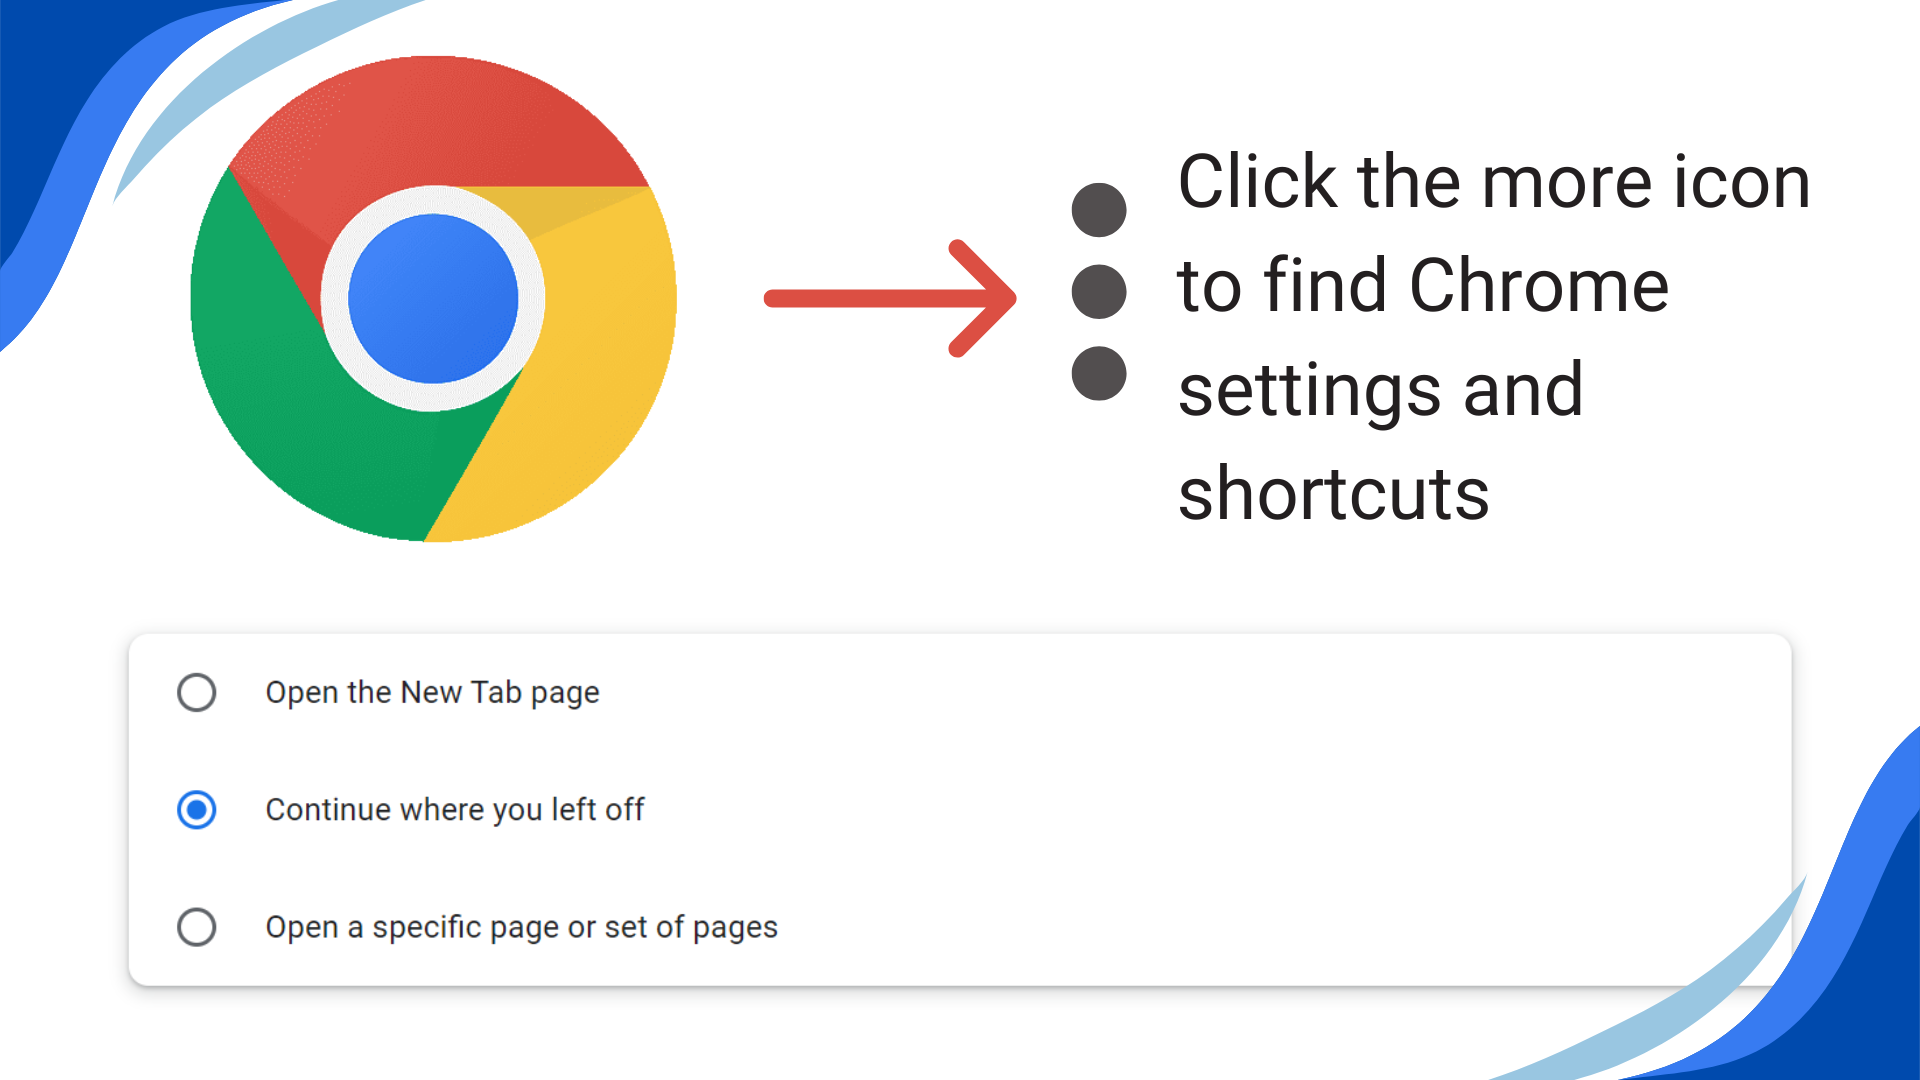 Click the more icon to find Chrome settings and shortcuts